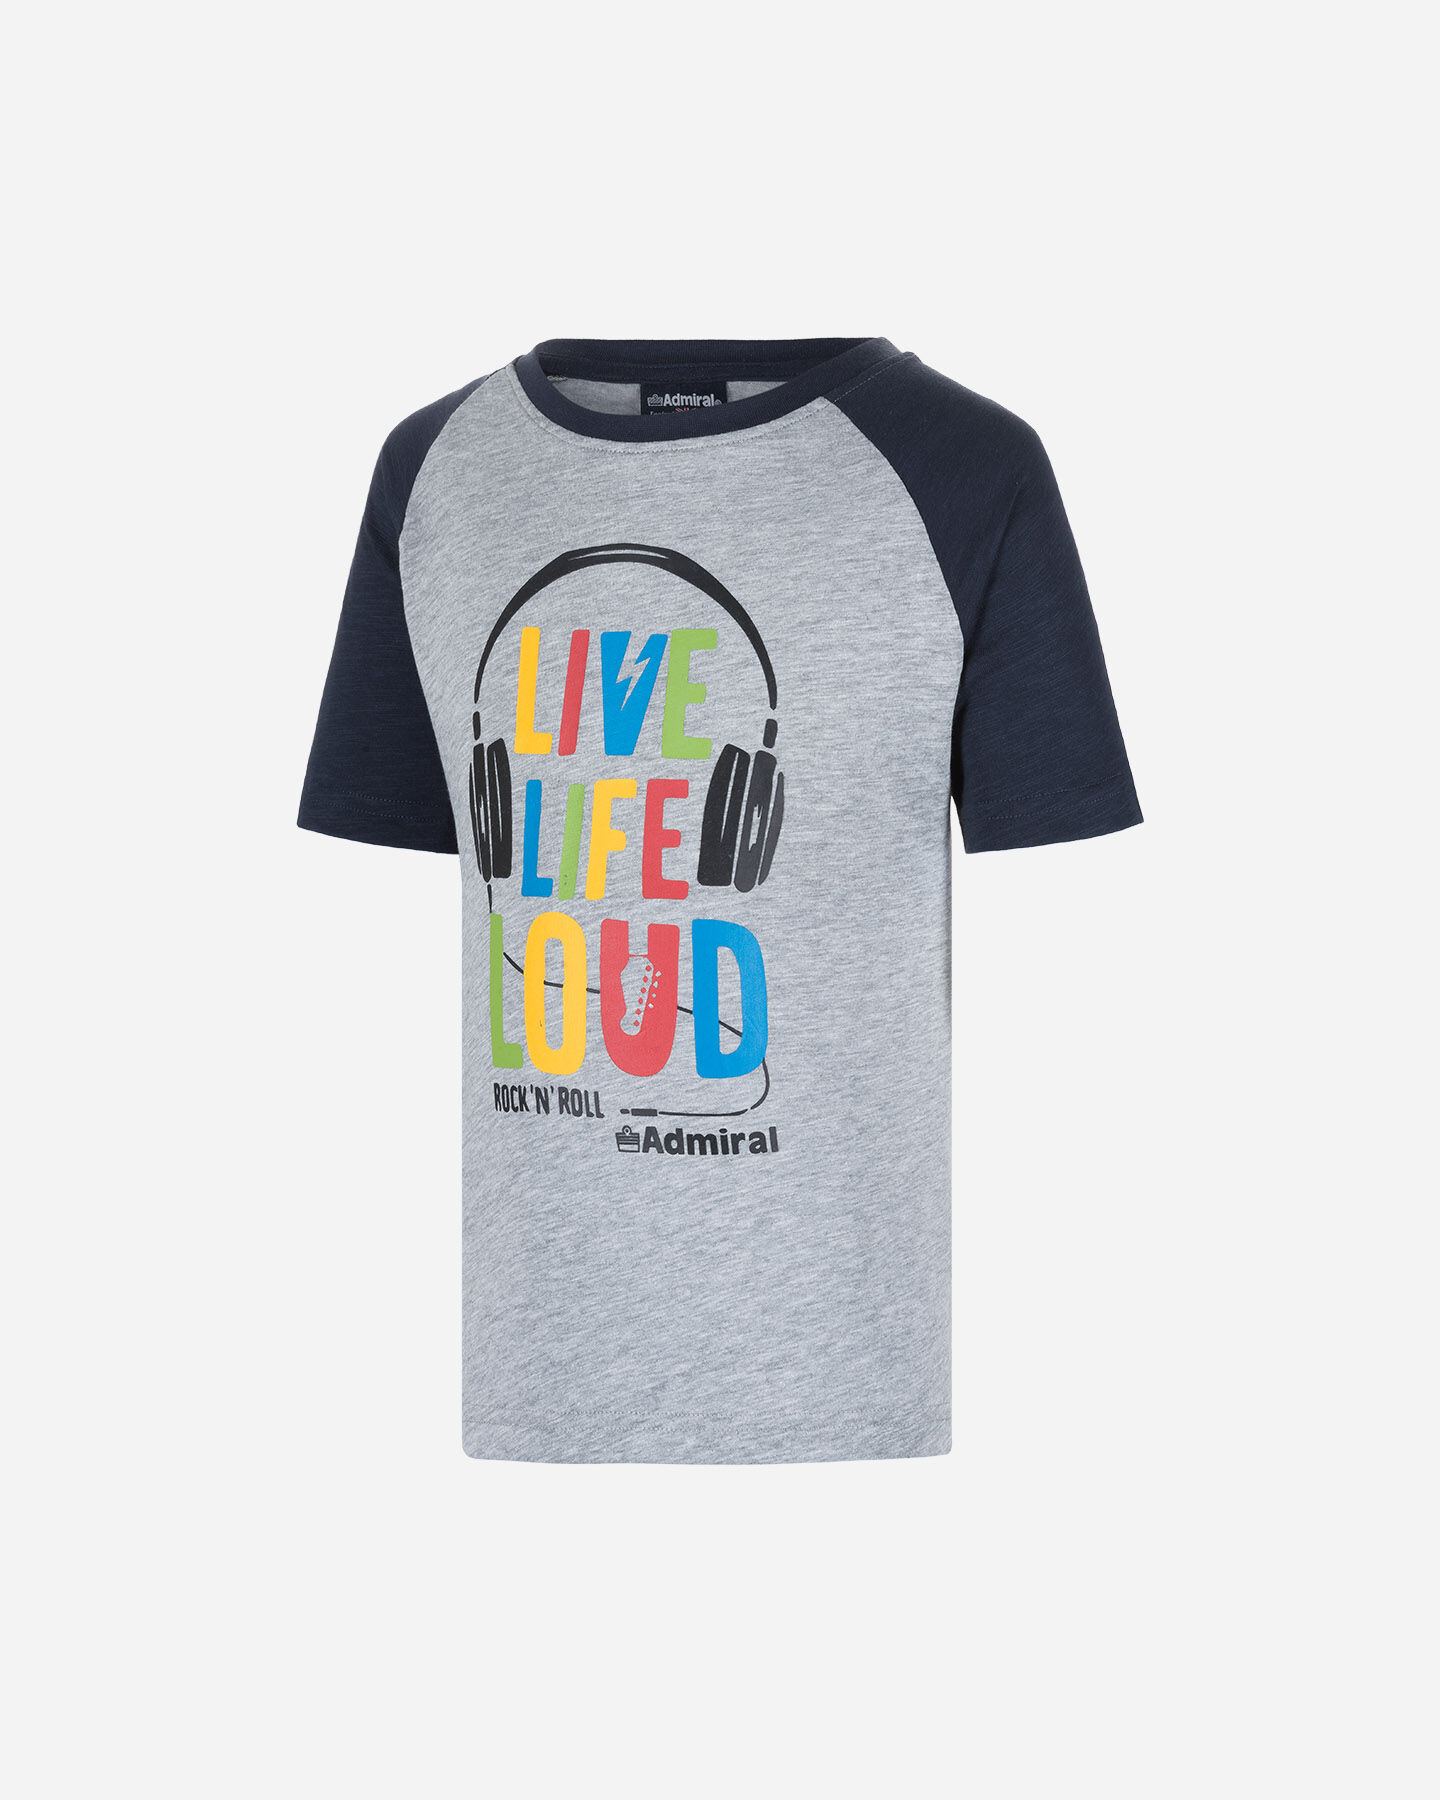  T-Shirt ADMIRAL LIVE LIFE LOUD JR S4075949|GM03/914|6A scatto 0